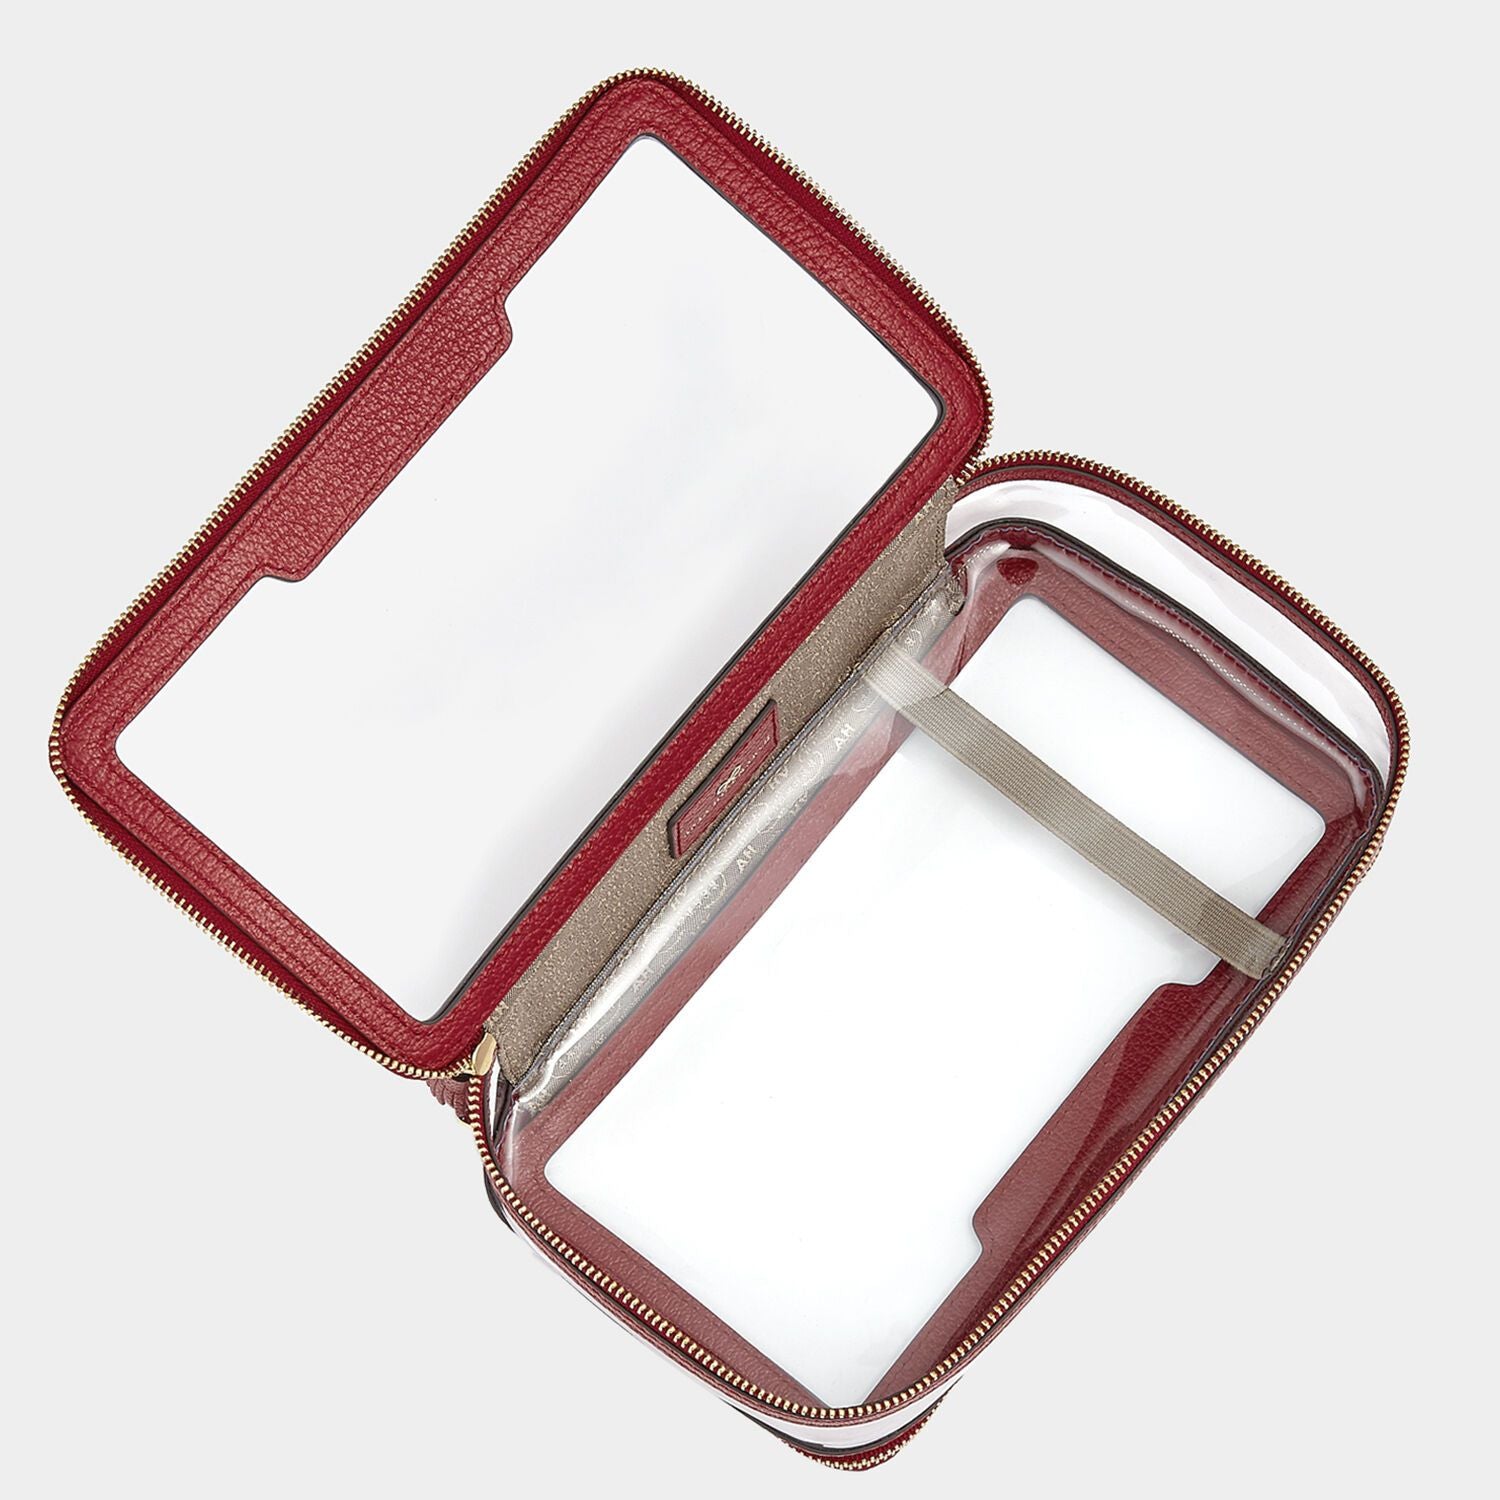 Bespoke In-Flight Case -

                  
                    Plastic in Red -
                  

                  Anya Hindmarch US
